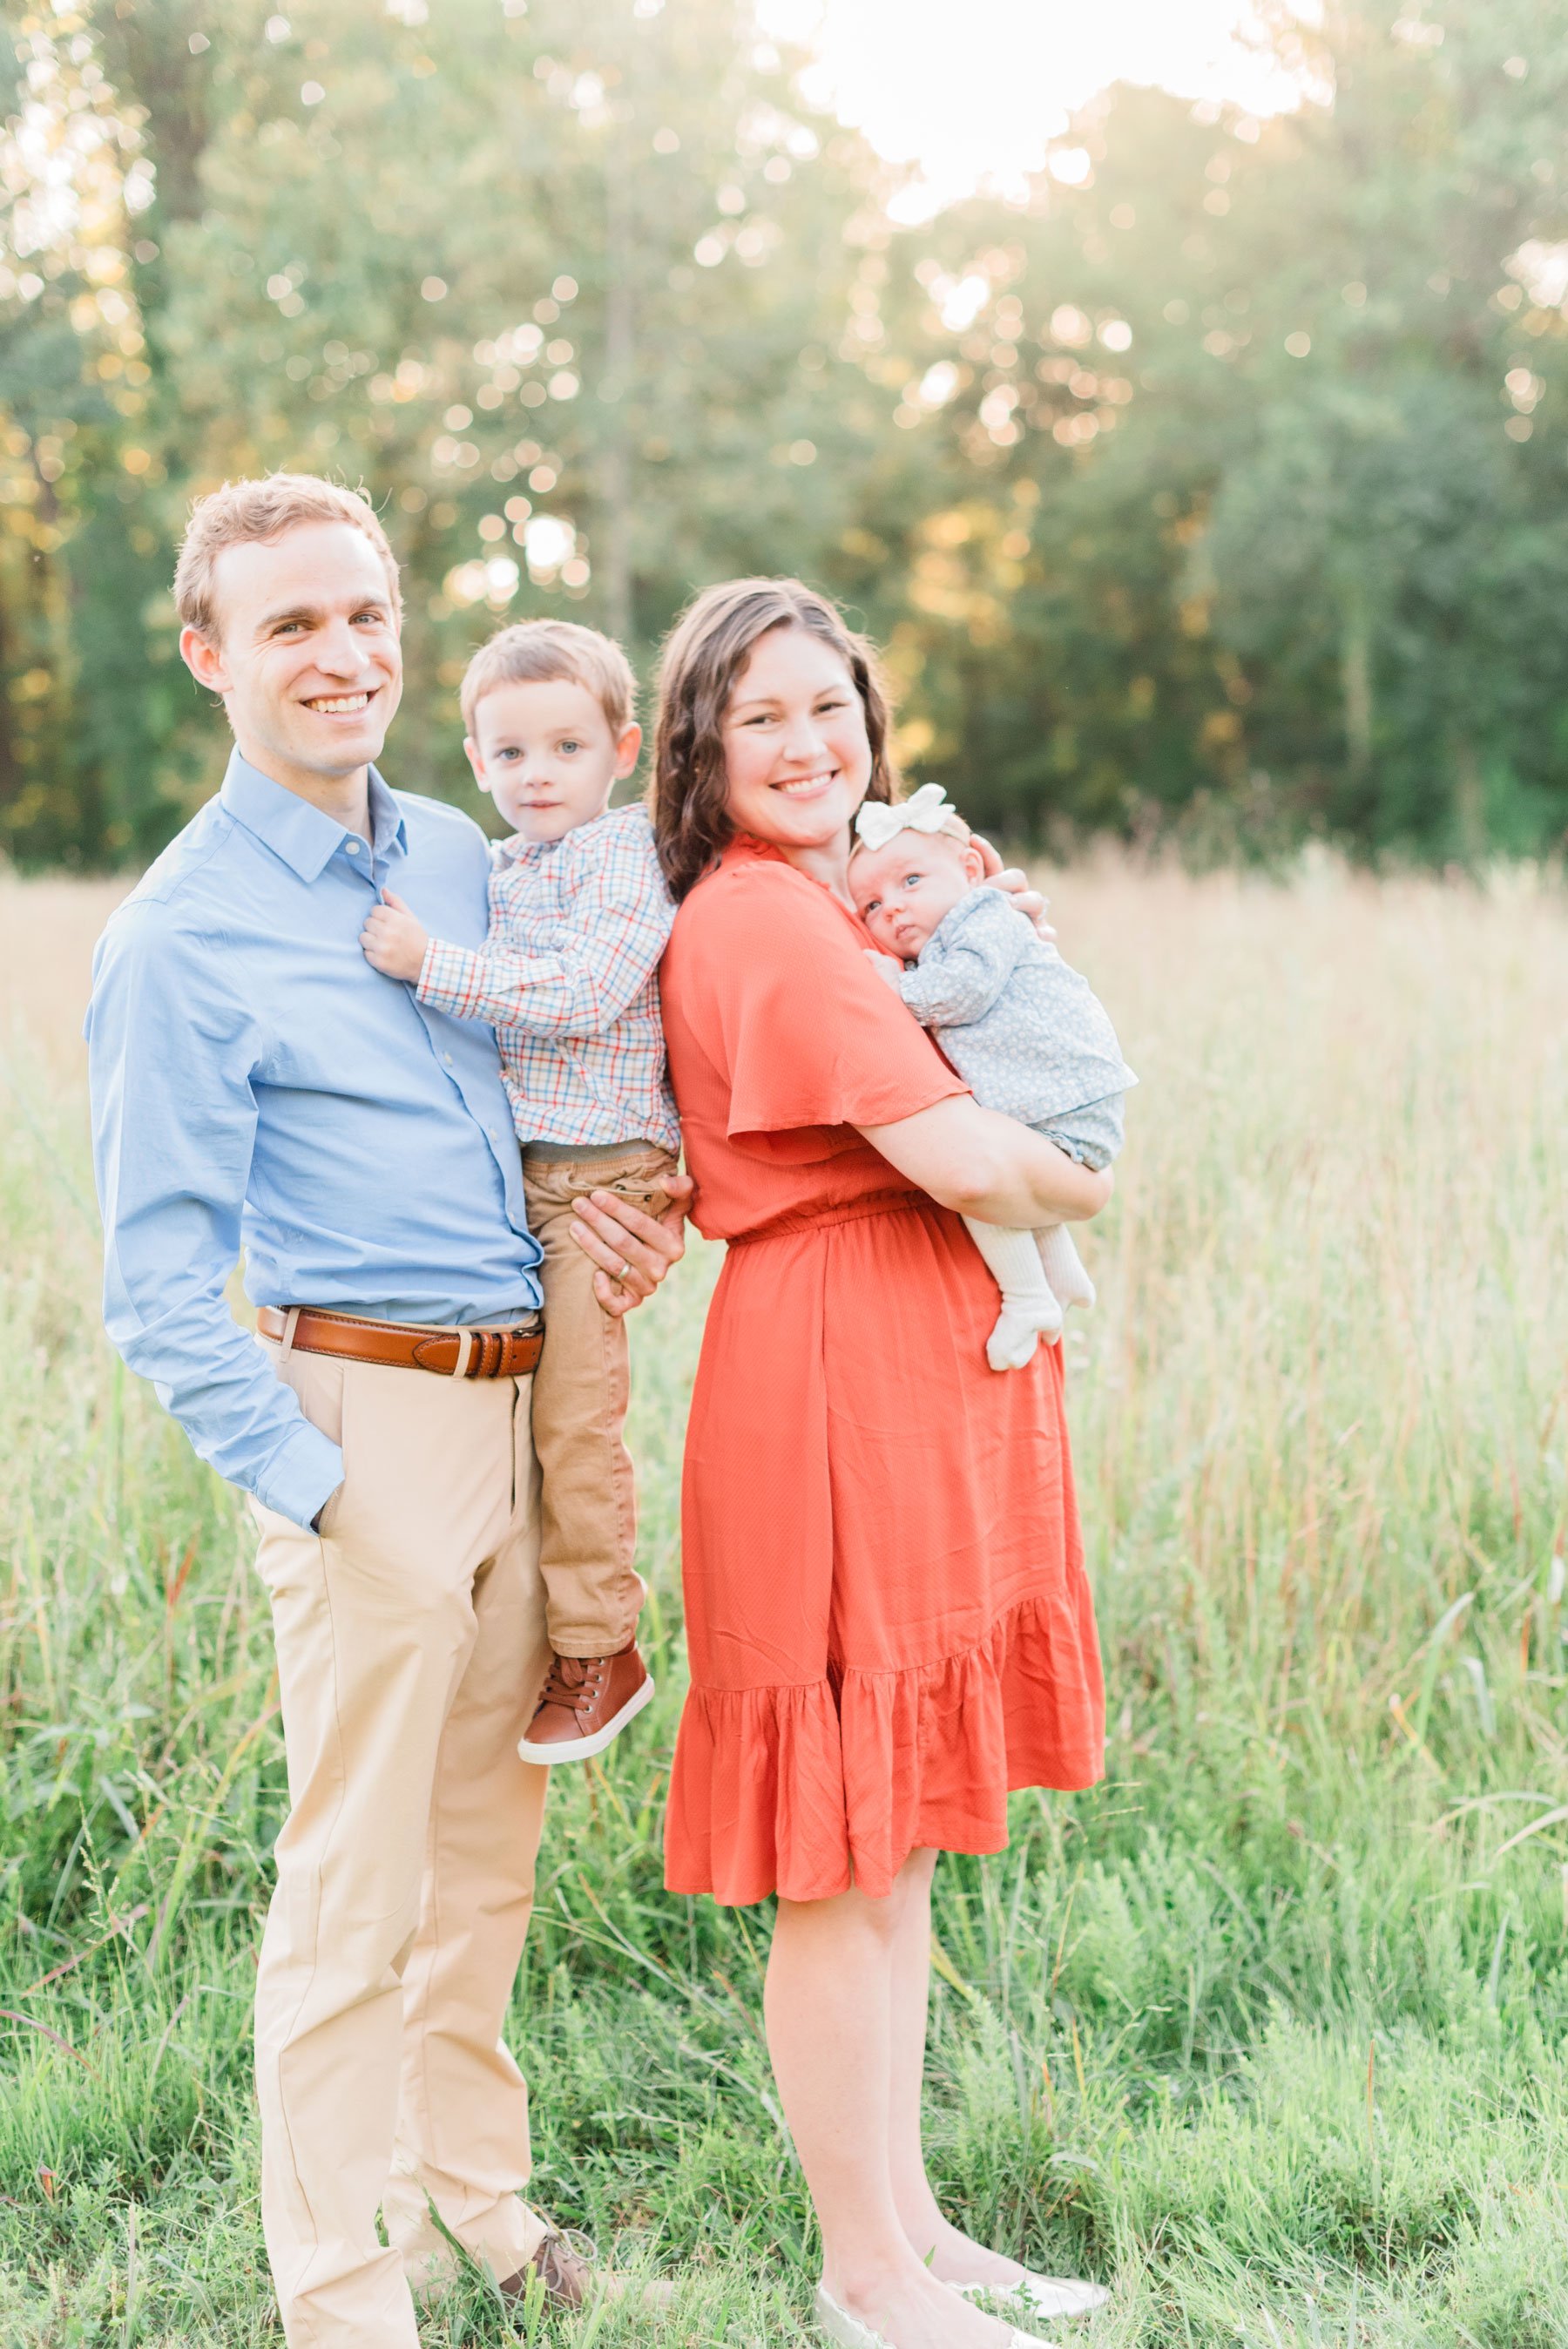    The golden hour light peeked through the trees during this outdoor Maryland family session. #marylandfamilyphotographer #findingafamilyphotographer #familyphotooutfits #semiformalphotooutfits #outdoorfamilysession #photoswithkids #georgiafamilypho